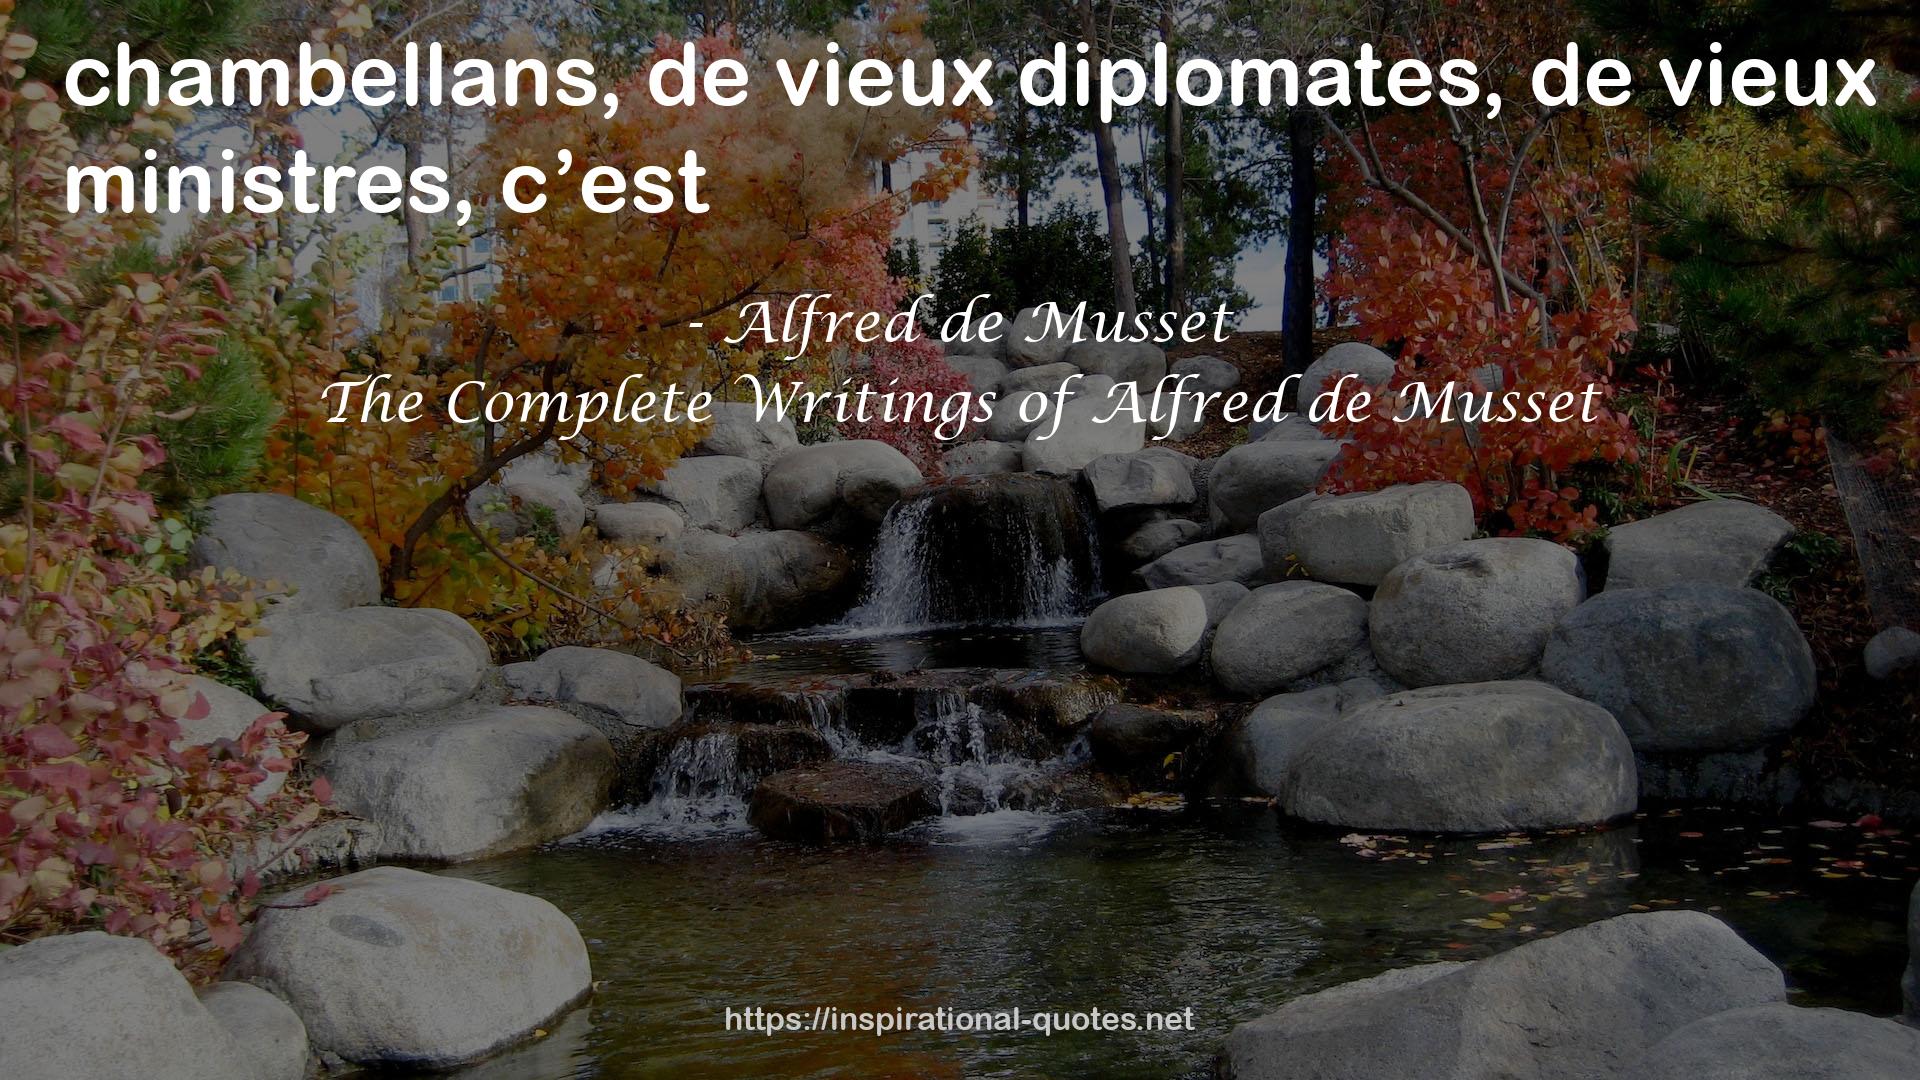 The Complete Writings of Alfred de Musset QUOTES